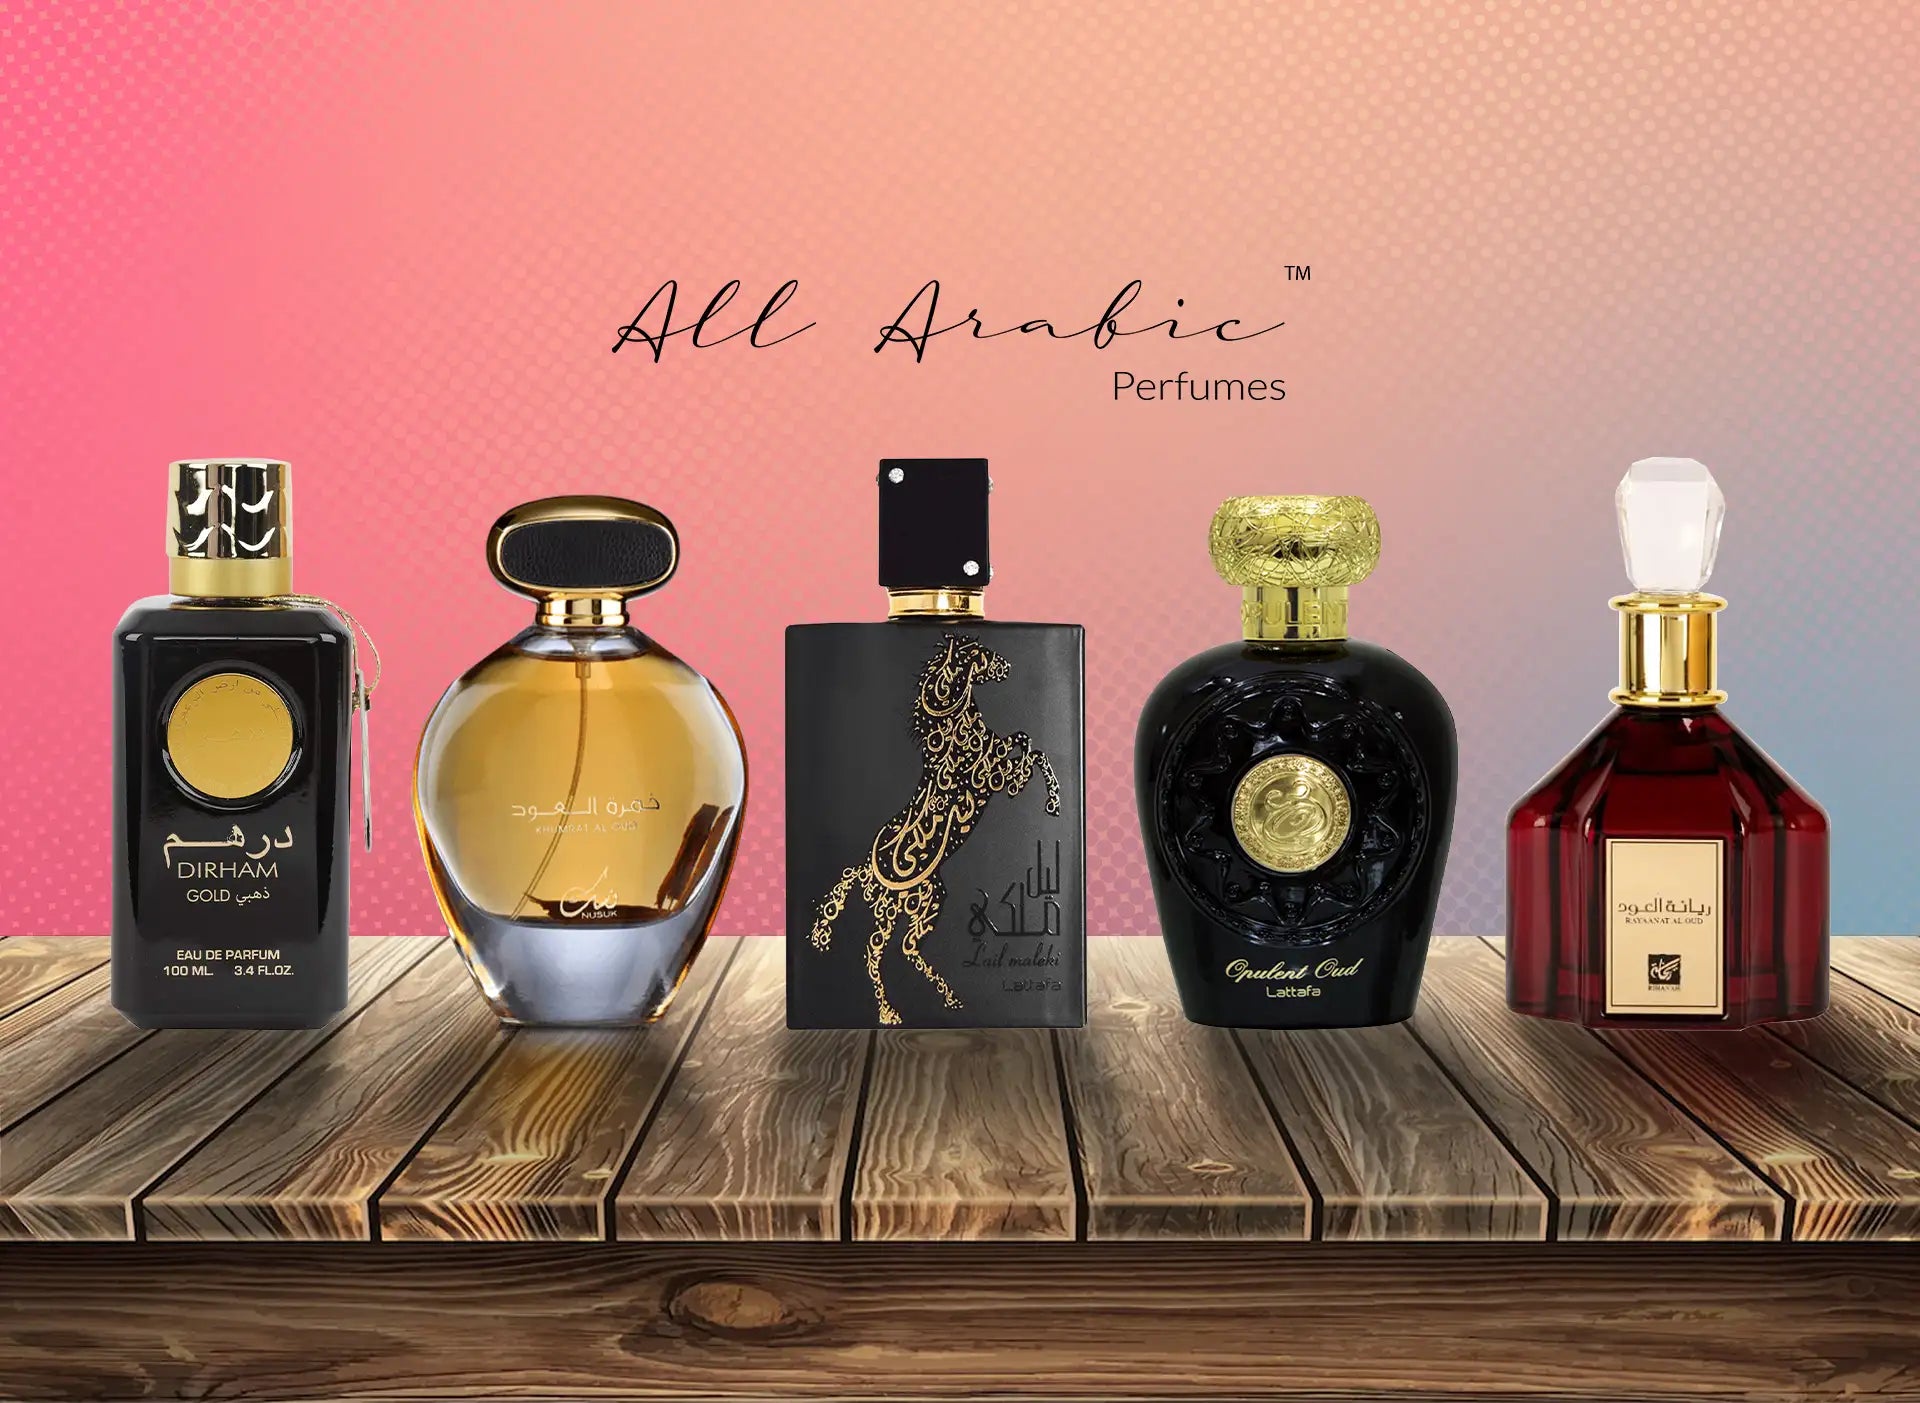 5 Fantastic Woody Perfumes For Her – All Arabic